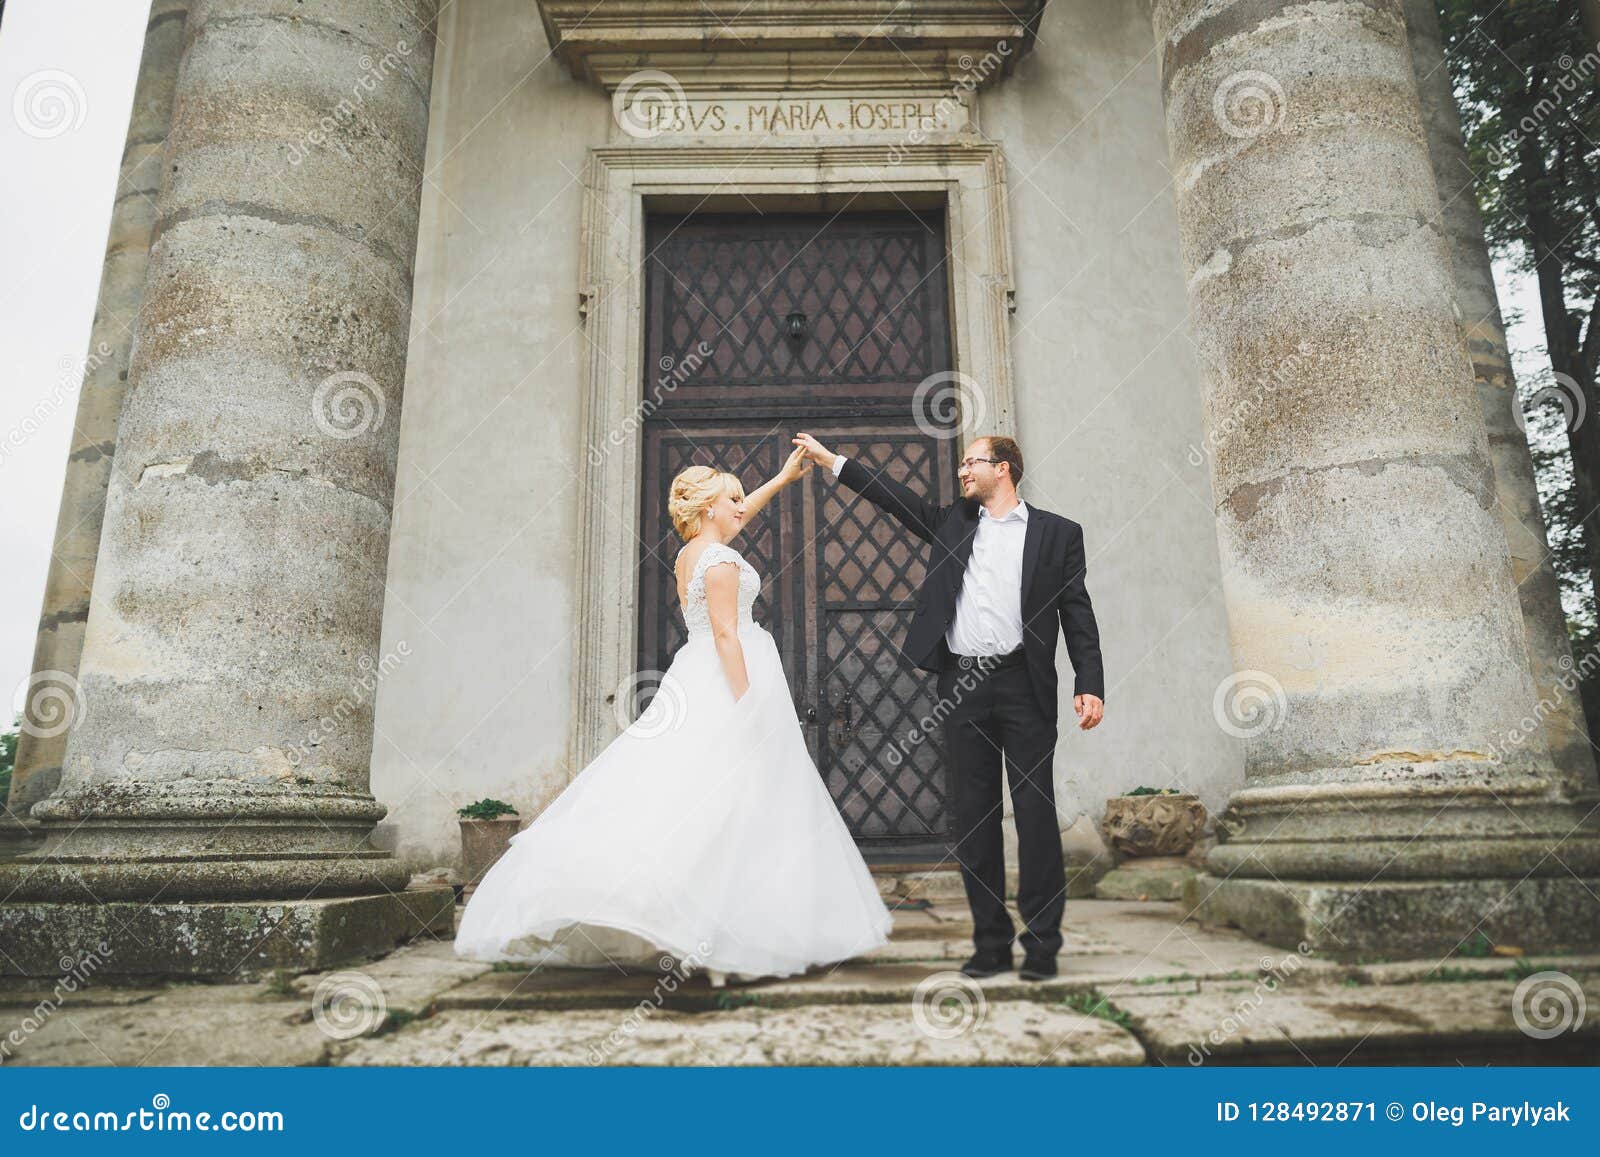 https://thumbs.dreamstime.com/z/sensual-married-couple-valentines-hugging-front-old-slavic-castle-sensual-married-couple-valentines-hugging-front-old-128492871.jpg